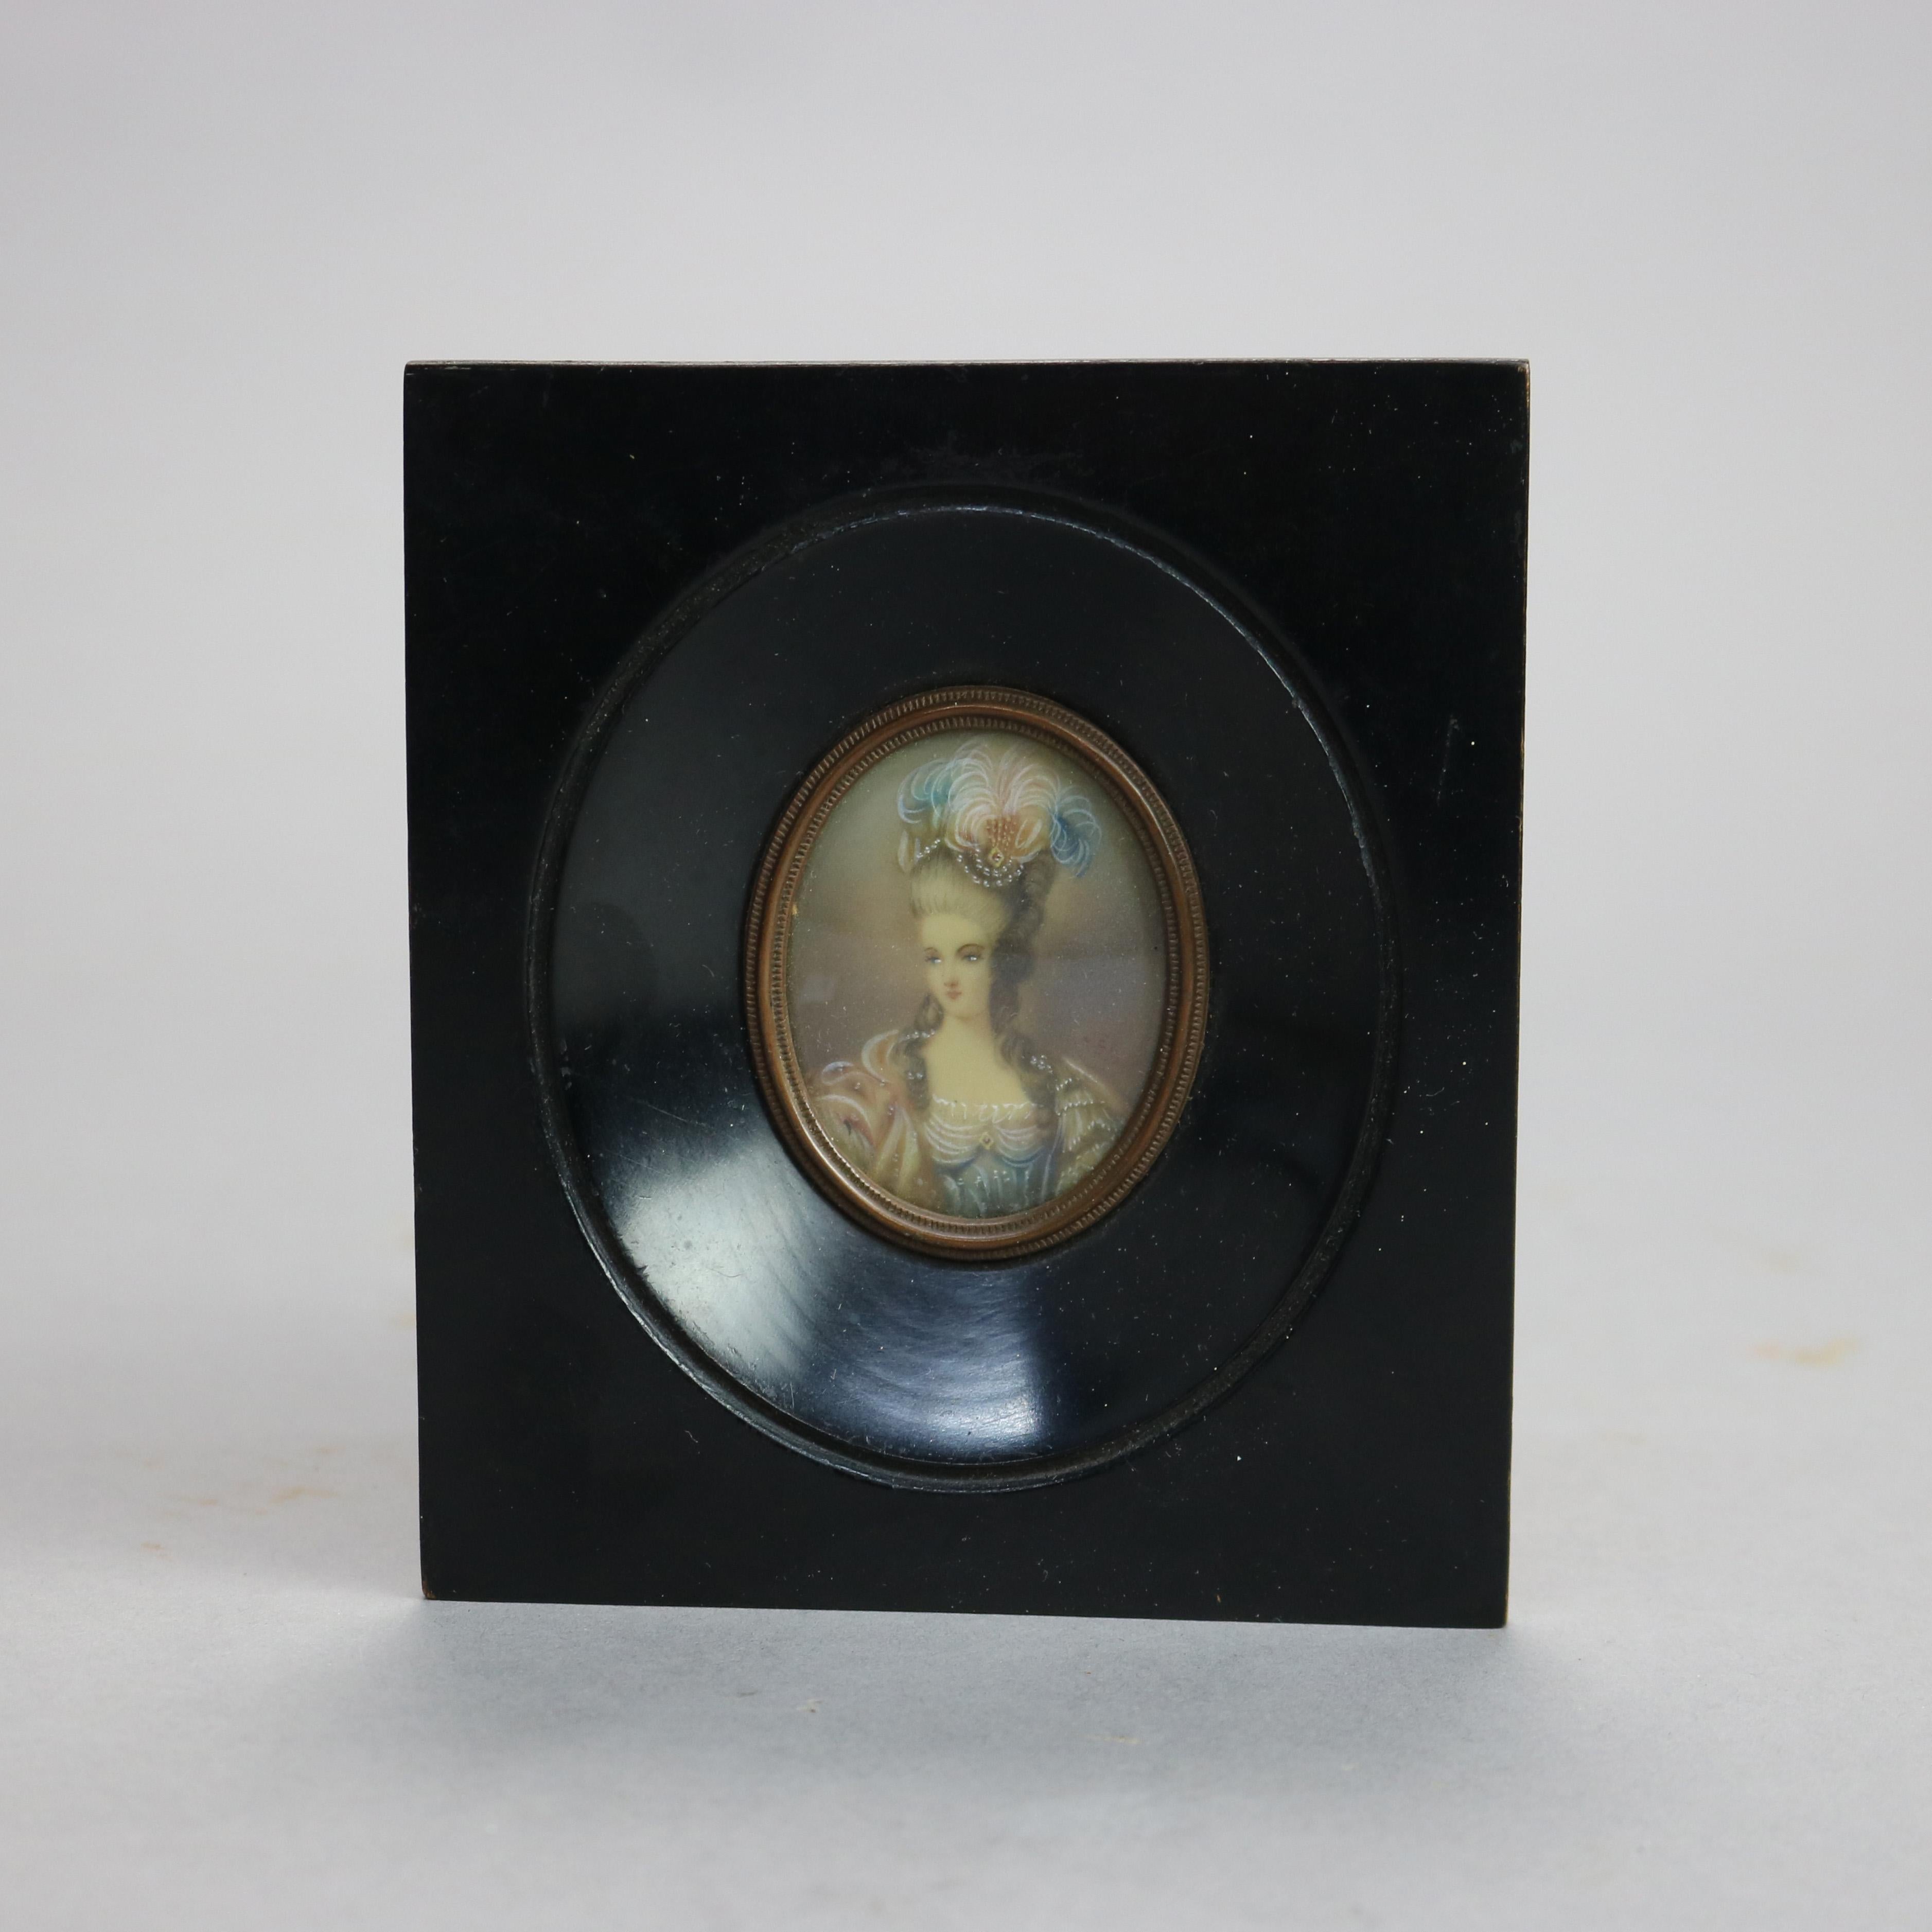 An antique miniature portrait painting on celluloid of Marie Antoinette seated in parcel gilt frame, artist signed Alex lower right, late 19th century

Measures - 4.75''H x 4.25''W x .75''D.

Catalogue Note: Ask about DISCOUNTED DELIVERY RATES